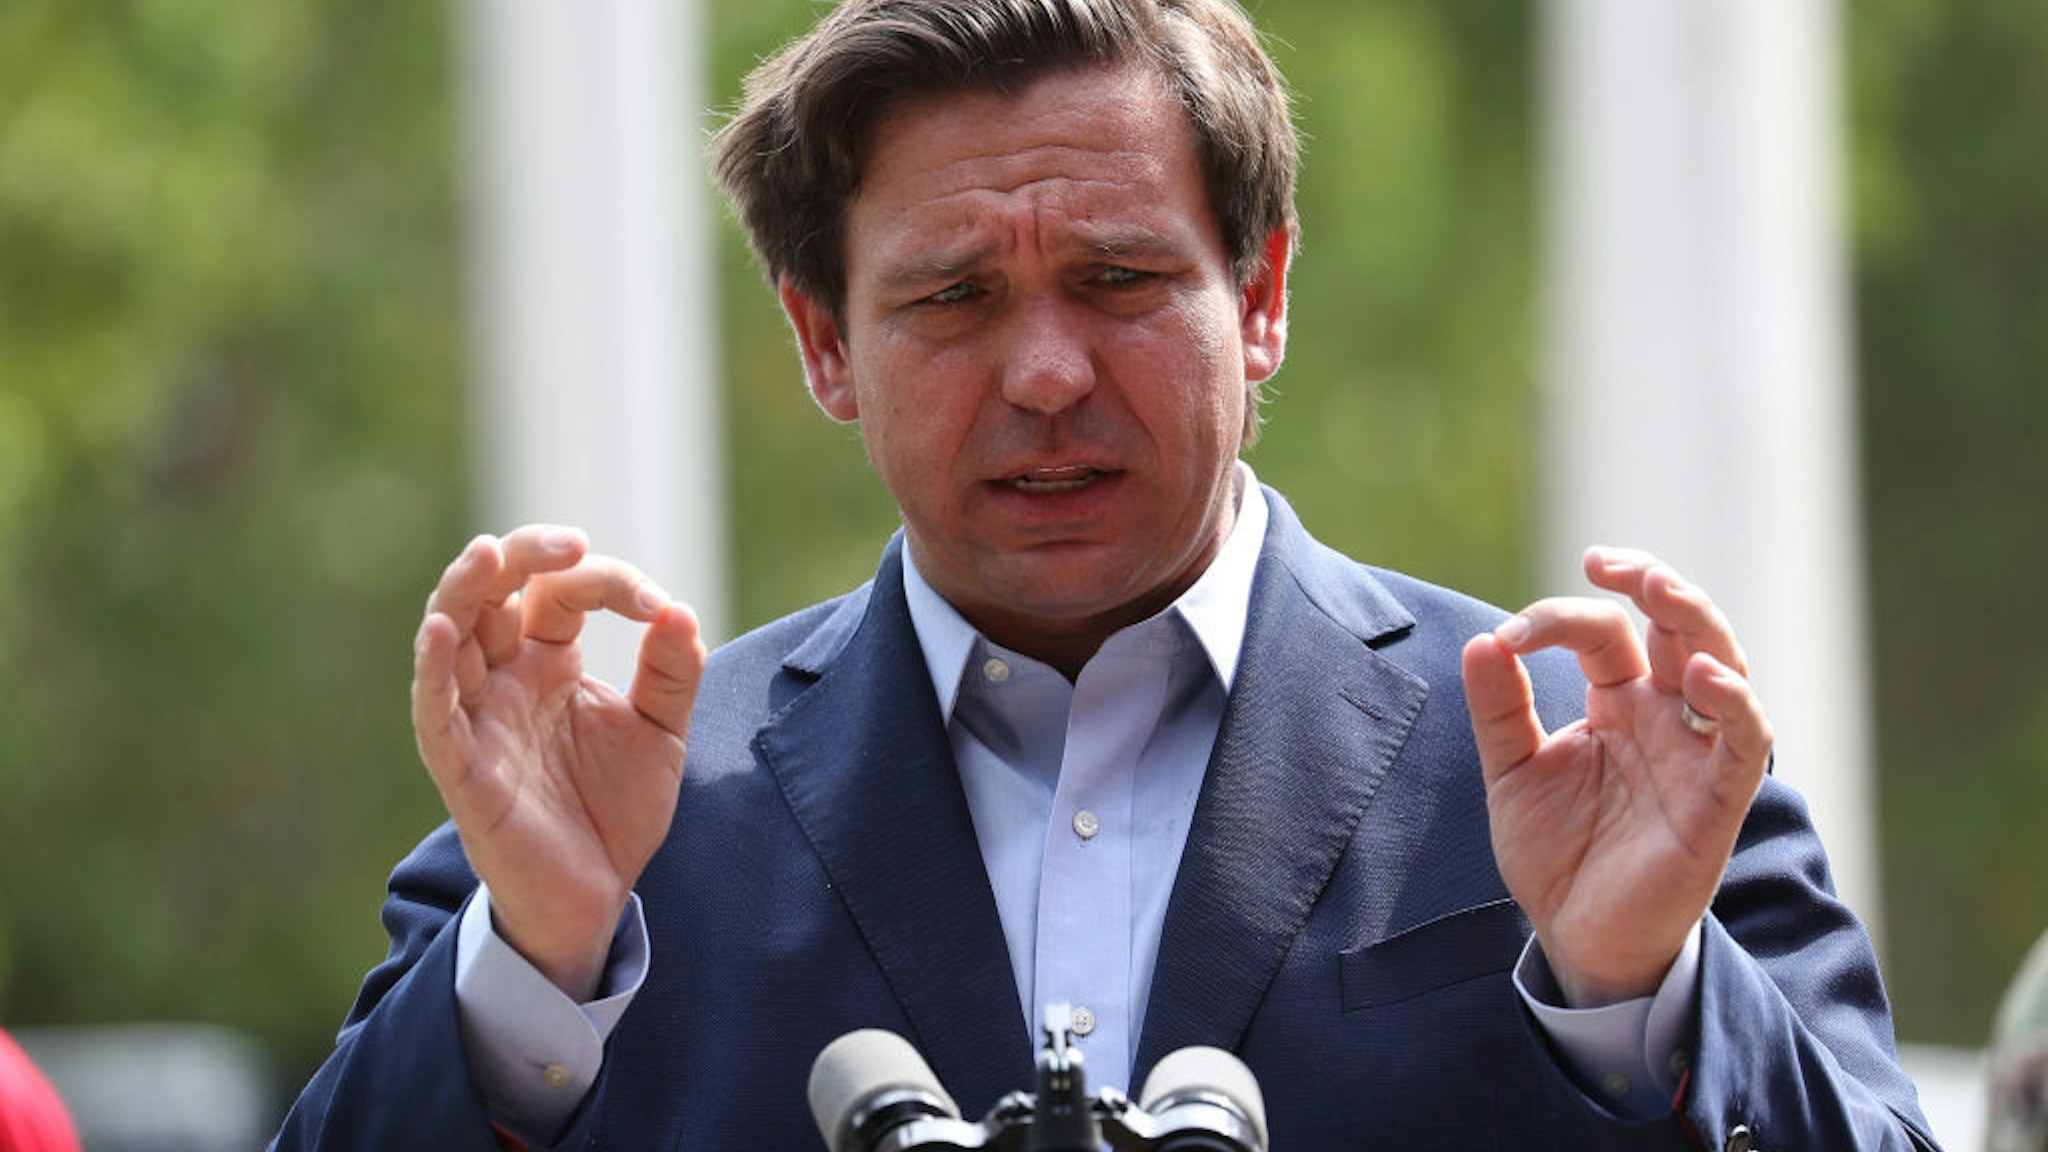 Florida Gov. Ron DeSantis gives updates about the state's response to the coronavirus pandemic during a press conference on April 17, 2020 in Fort Lauderdale, Florida.